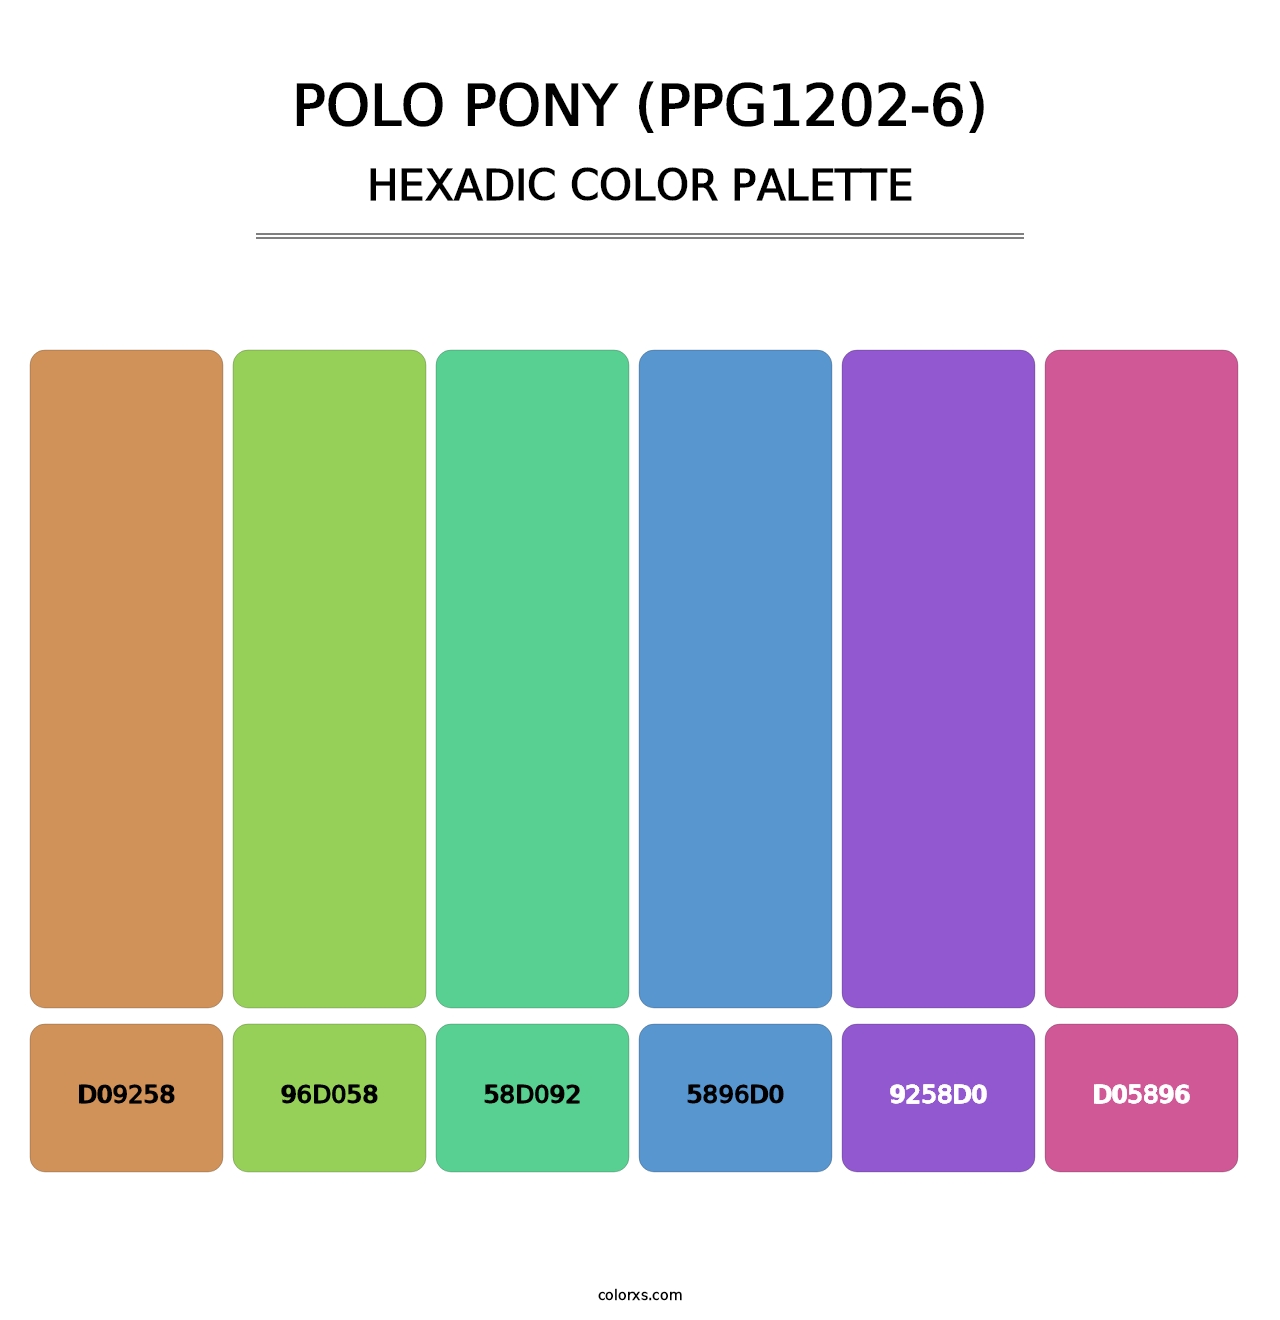 Polo Pony (PPG1202-6) - Hexadic Color Palette